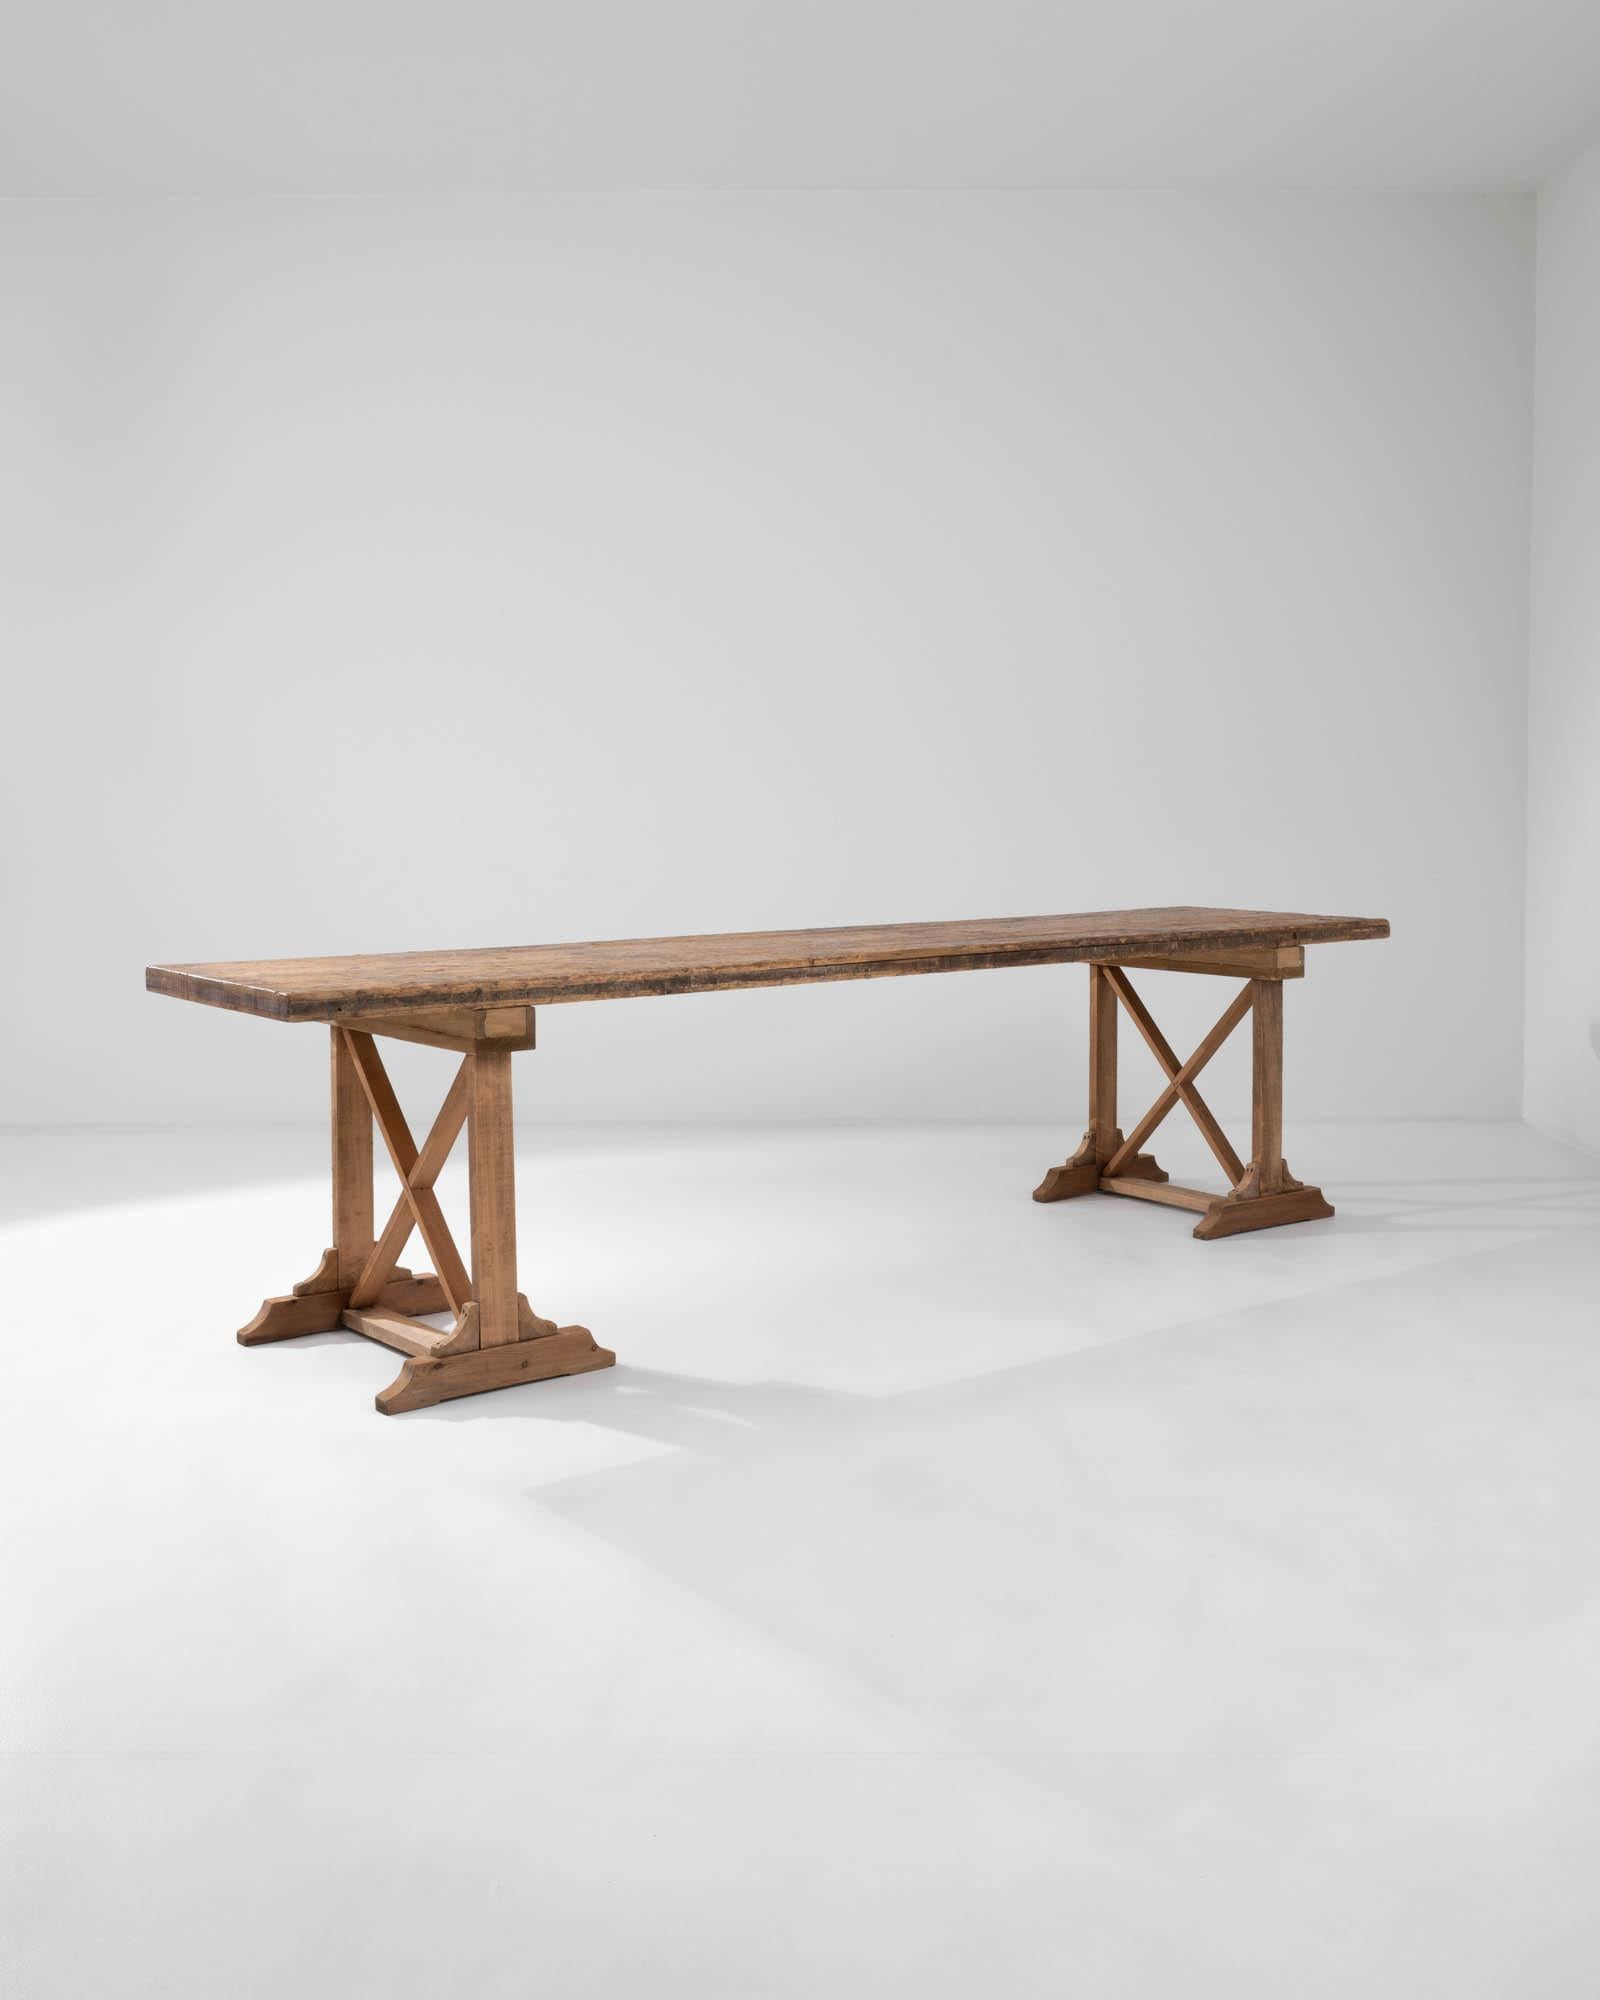 This vintage wooden dining table makes a handsome country centerpiece. Made in France in the 20th century, the form has a rustic simplicity: a long rectangular tabletop sits atop trestle legs, braced with bold X-shaped struts. The clean corners of